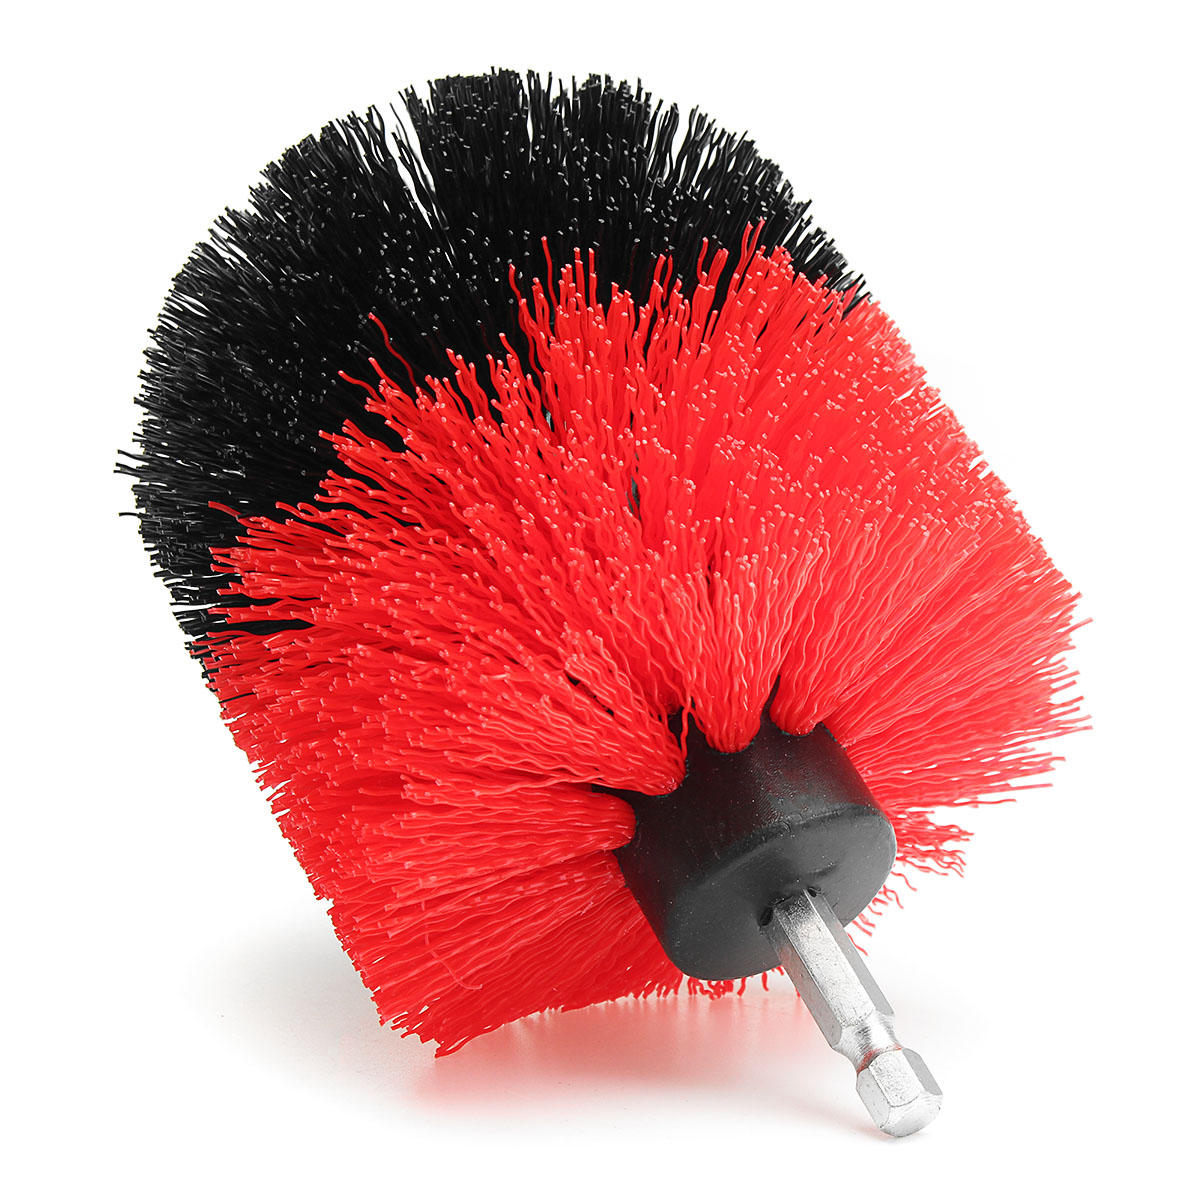 35-Inch-Drill-Cleaning-Ball-Brush-Power-Scrubber-Bathroom-Tub-Tile-Cleaning-Tool-1329638-4